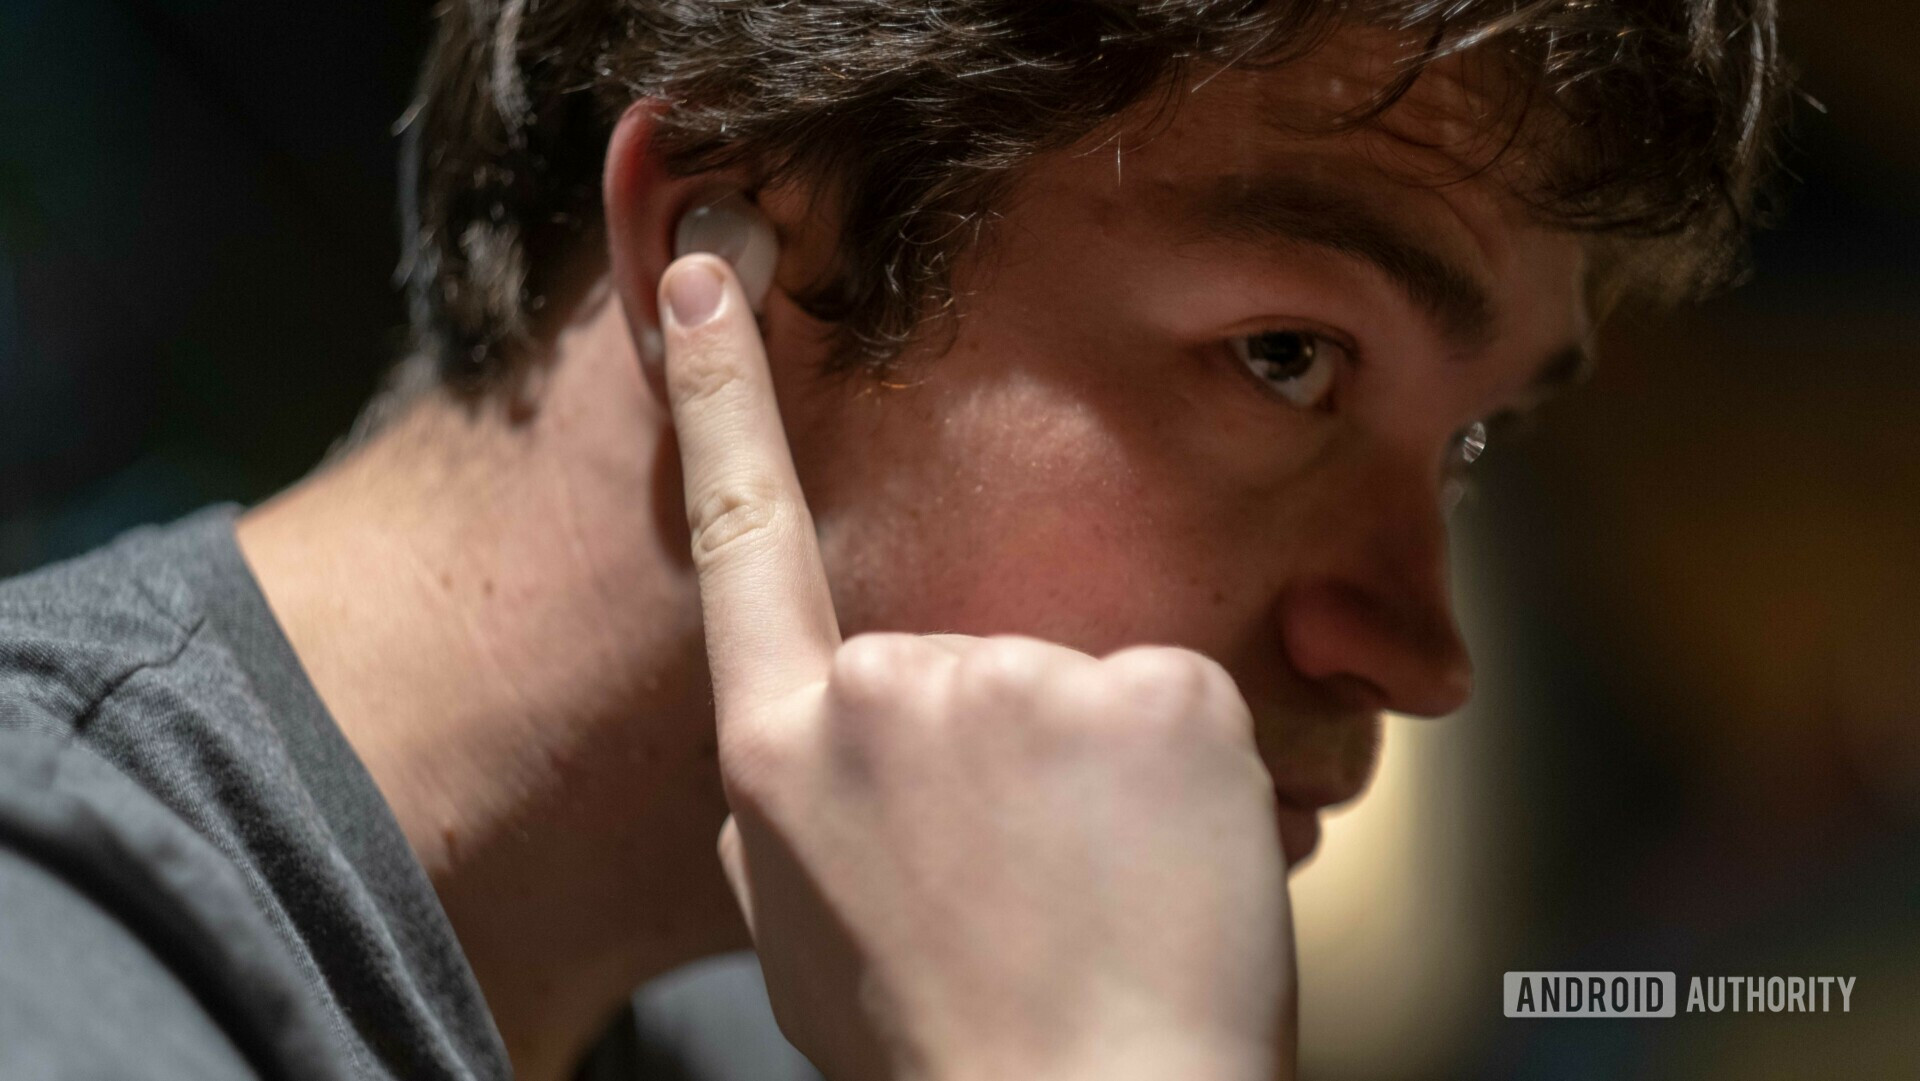 Samsung Galaxy Buds worn by a man using the touch controls